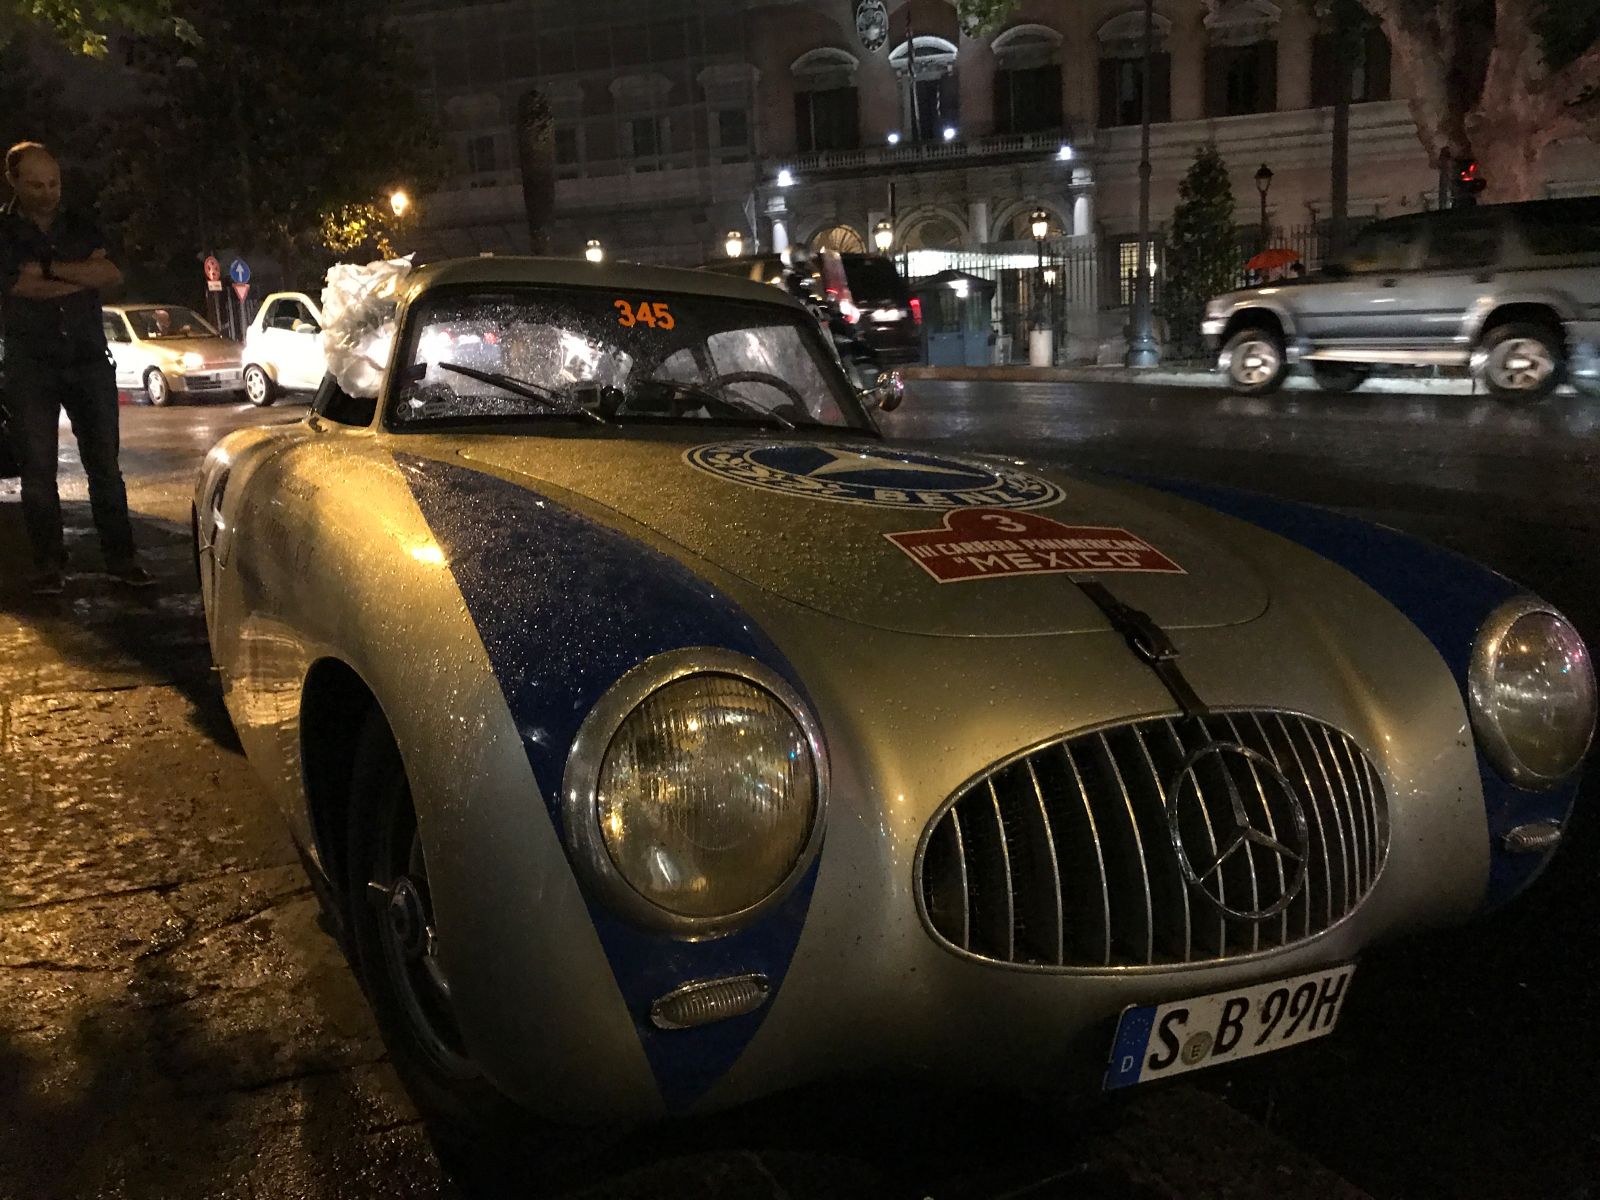 The same car sitting in Rome. This car placed 4th in the 1952 Mille Miglia